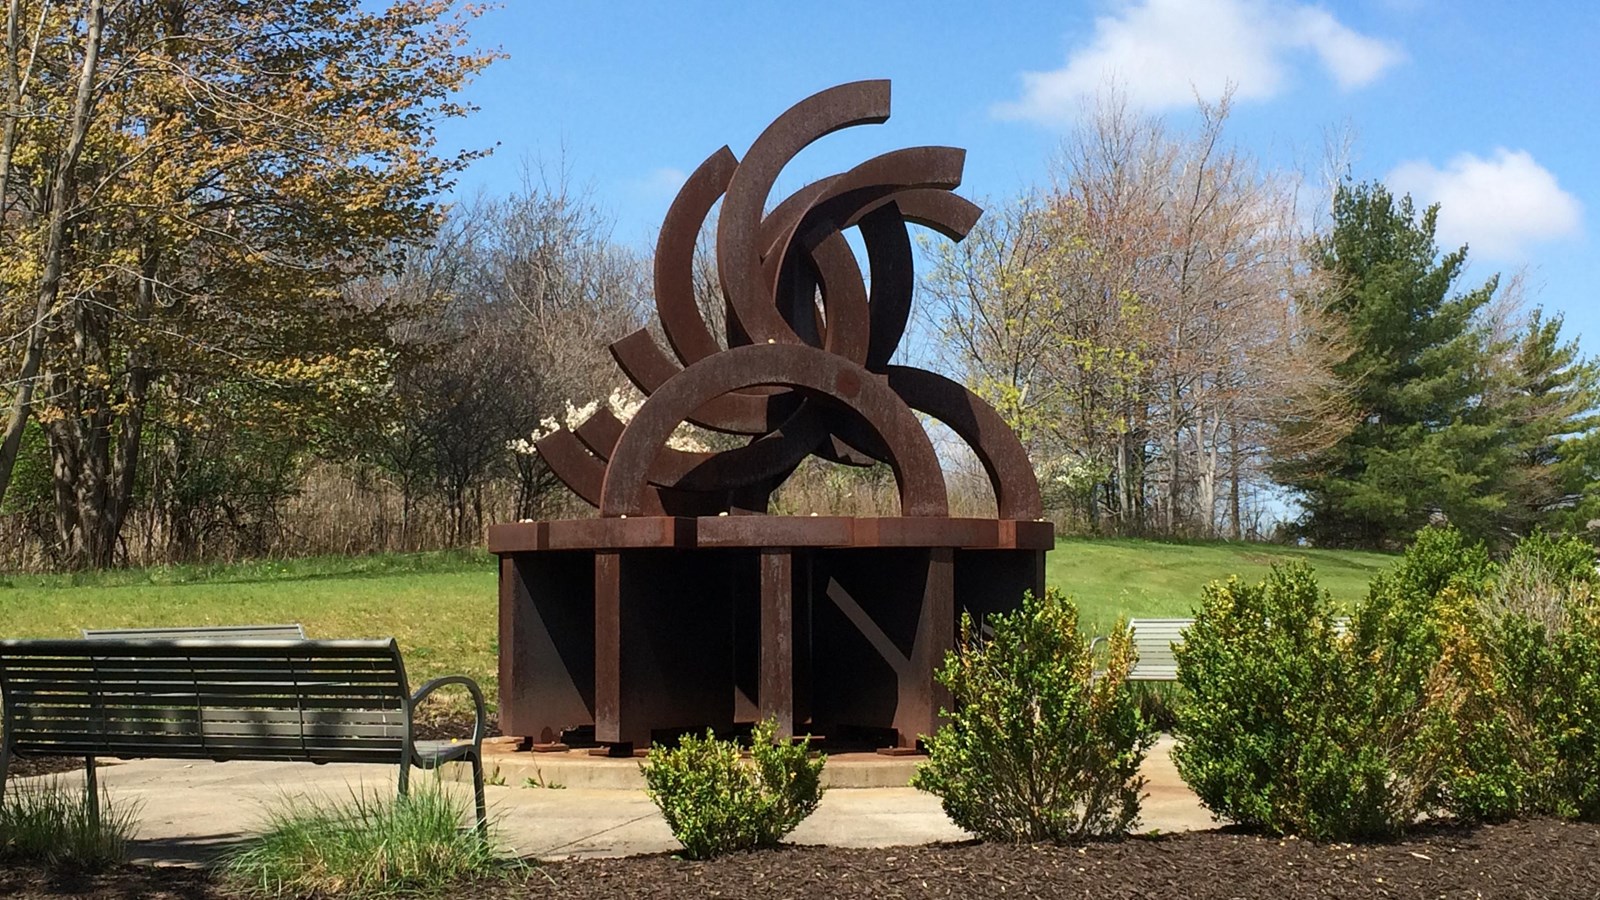 Rust-colored metal sculpture depicting broken Olympic rings surrounded by a circular cement walkway.